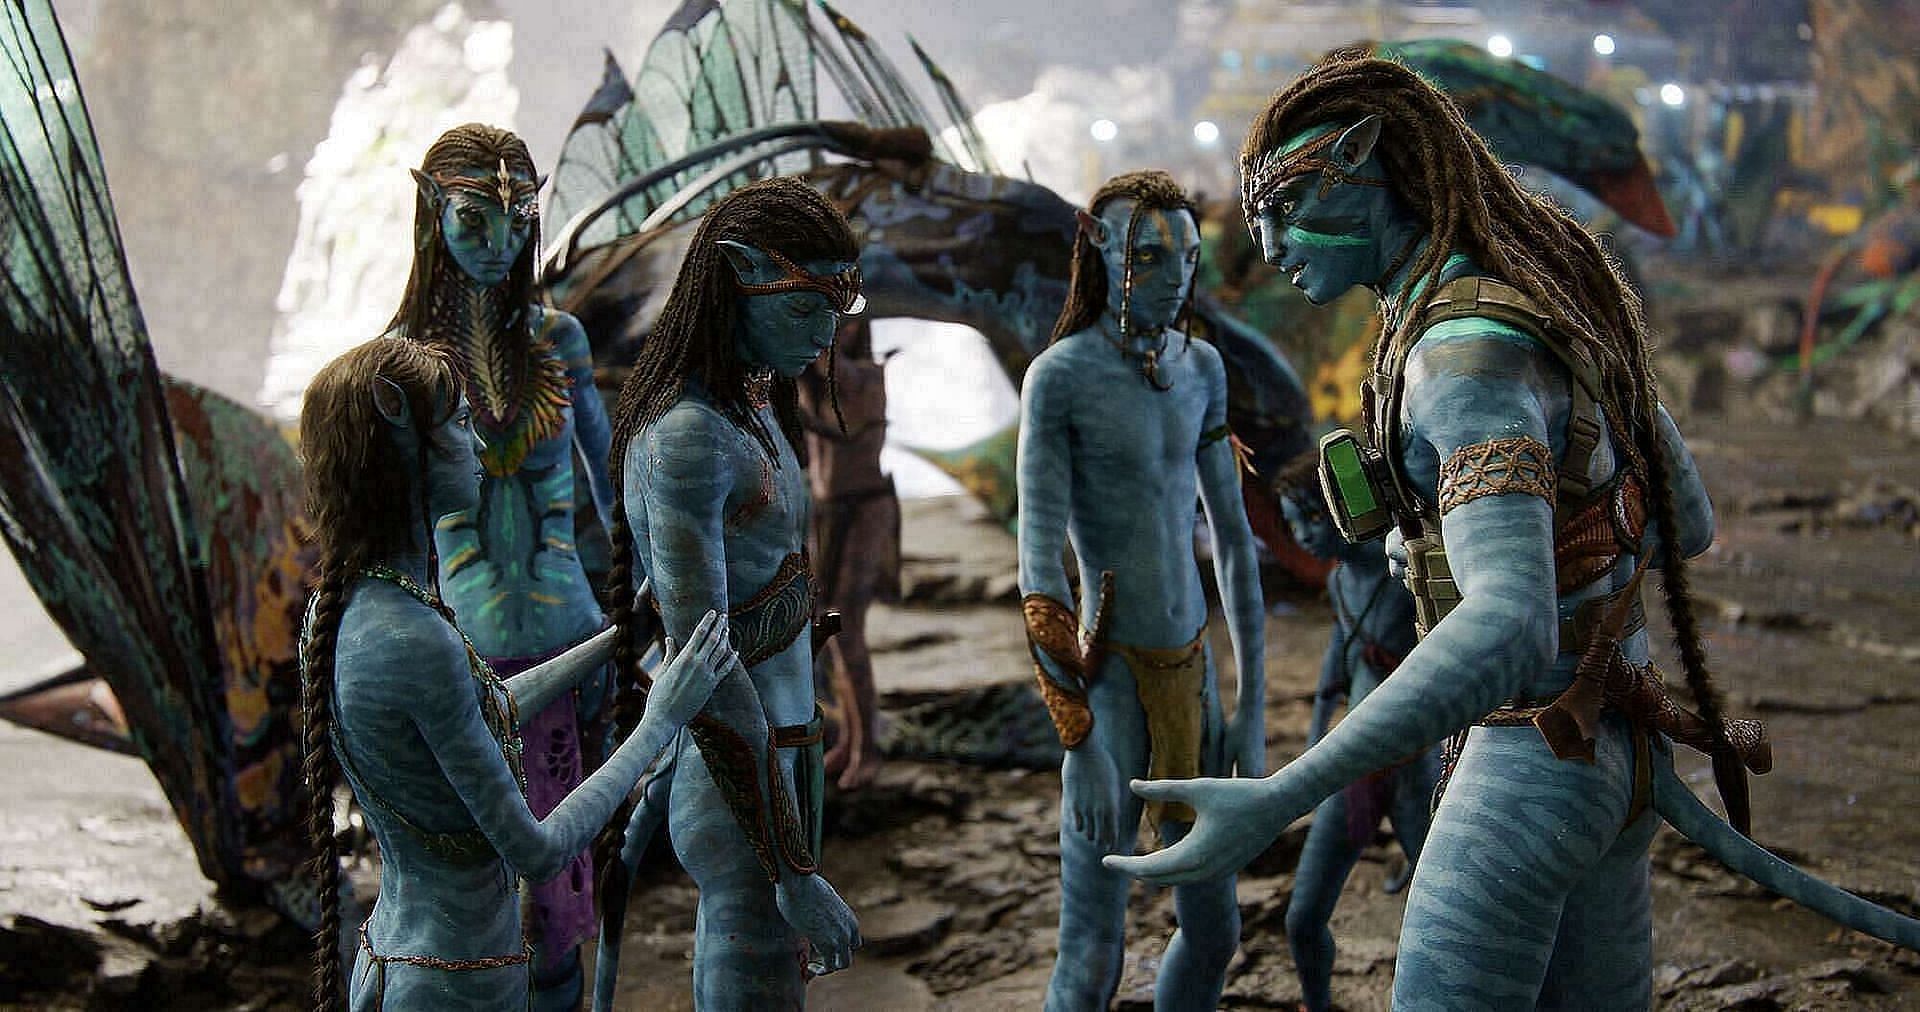 Jake Sully's family in Avatar: The Way of Water (Image via 20th Century Studios)